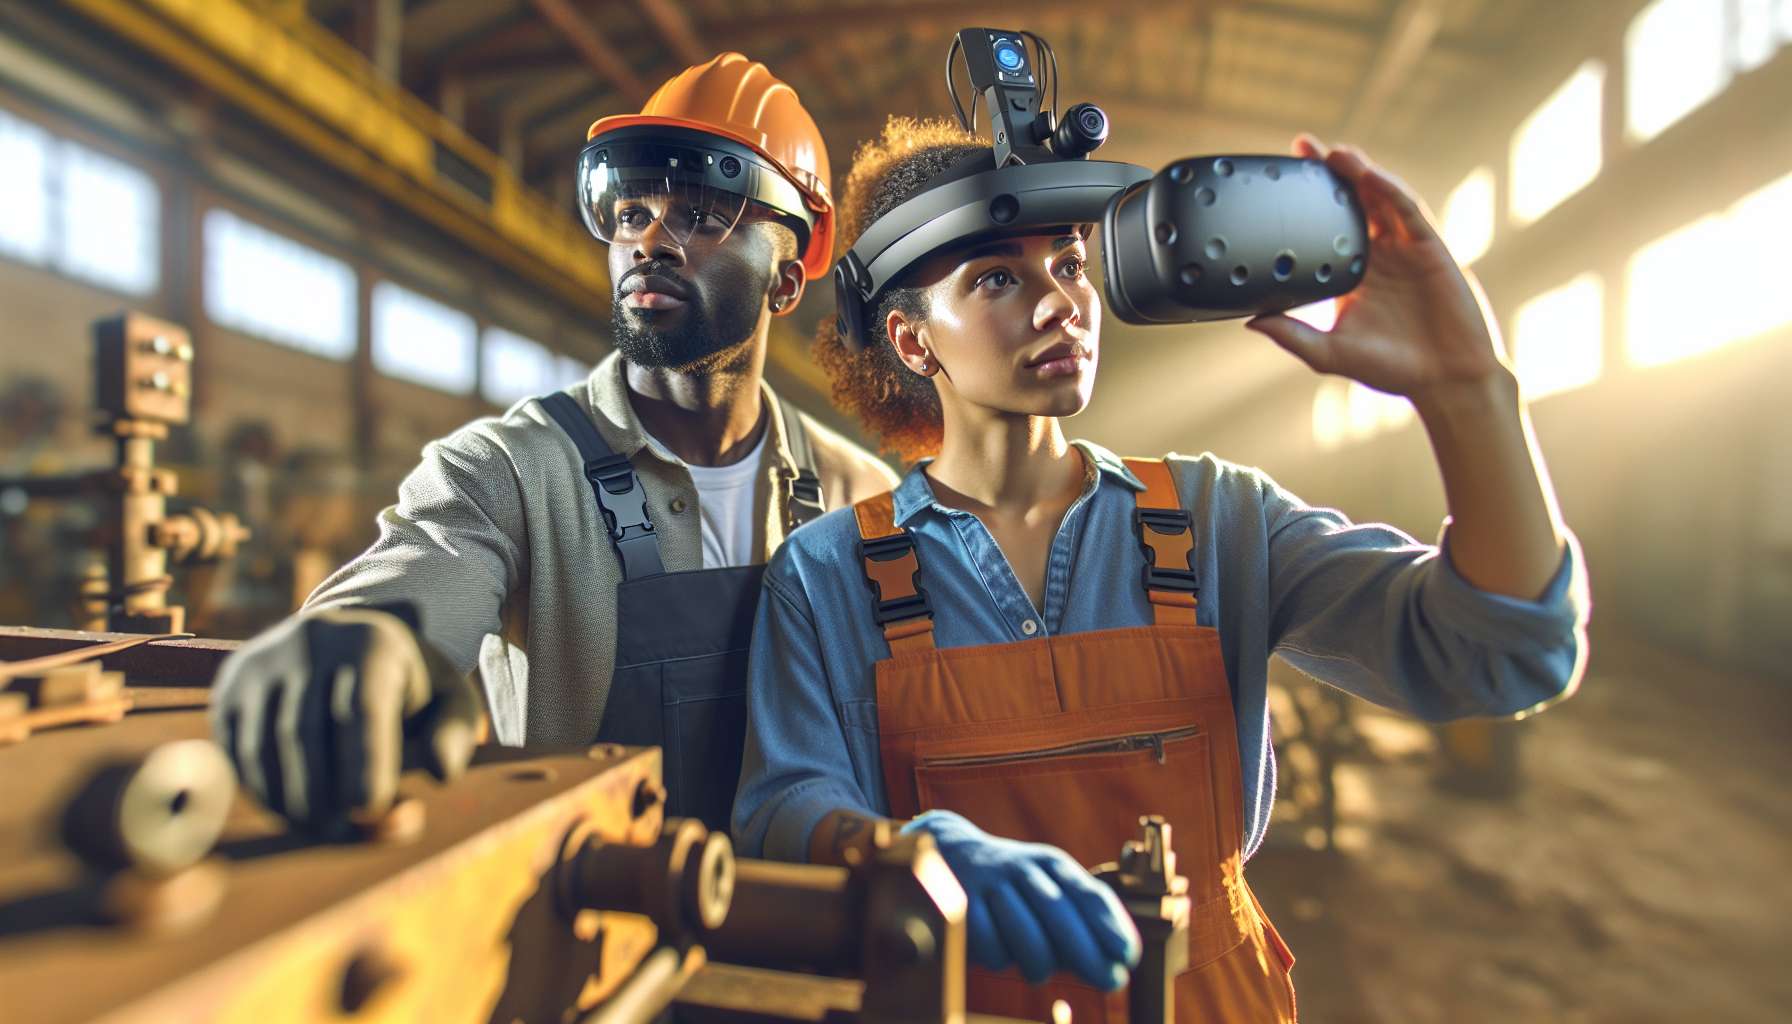 The Future is Now: AR and IoT Transforming Industrial Operations